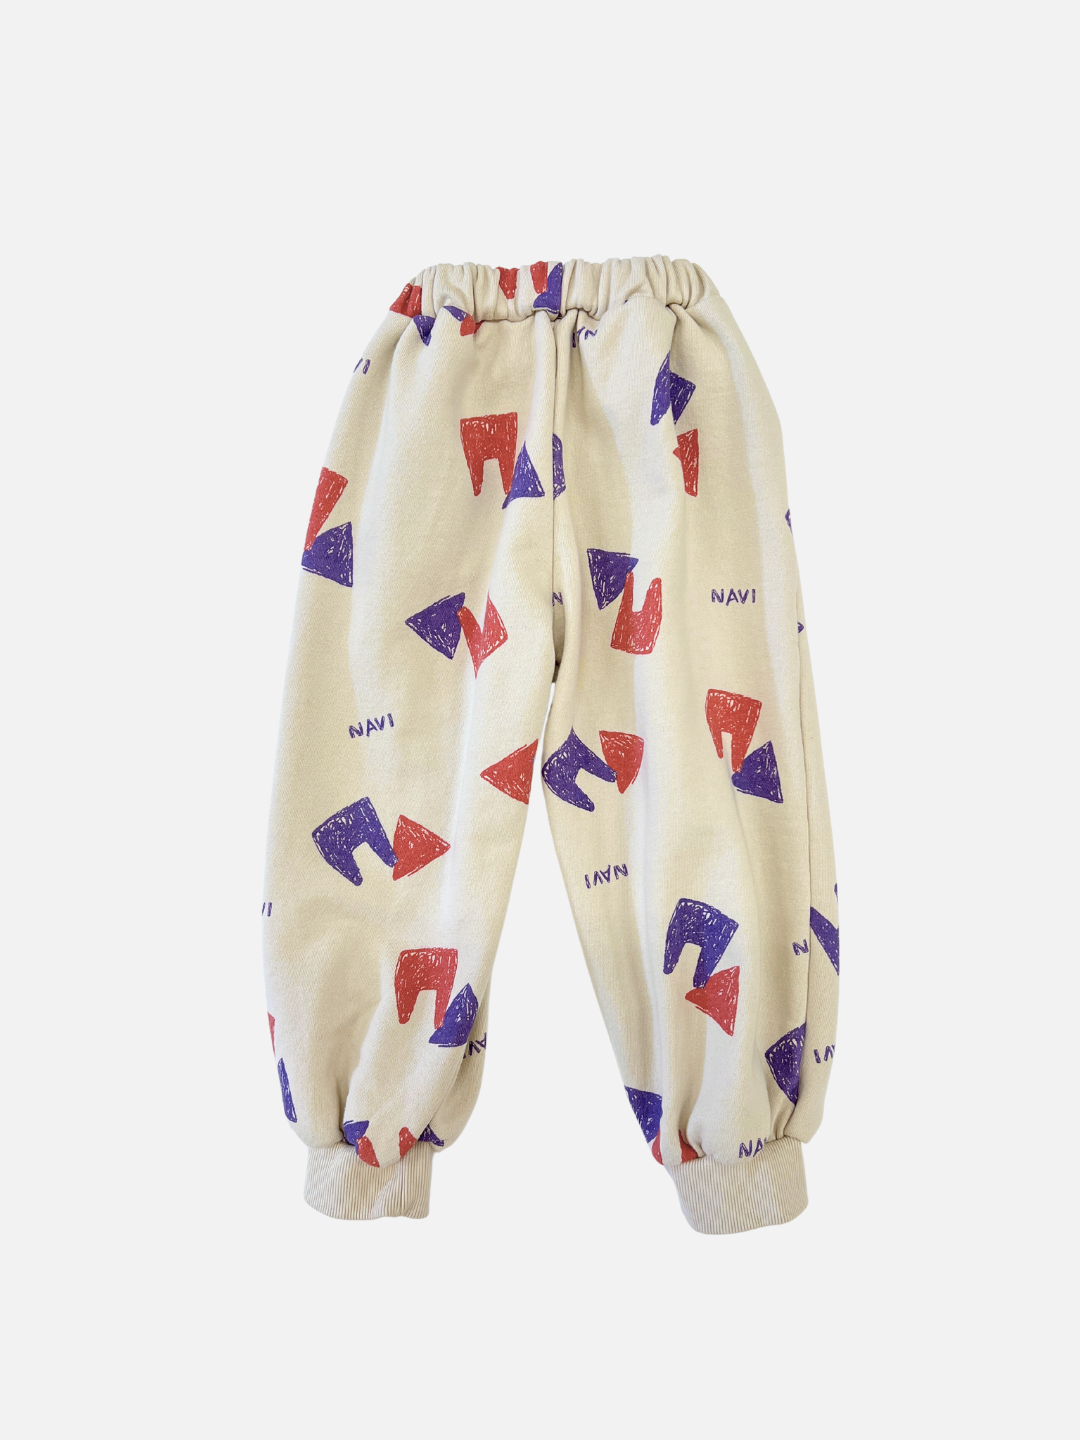 Back view of kids beige sweatpants with an all over pattern of red and purple shapes and the brand name Navi.